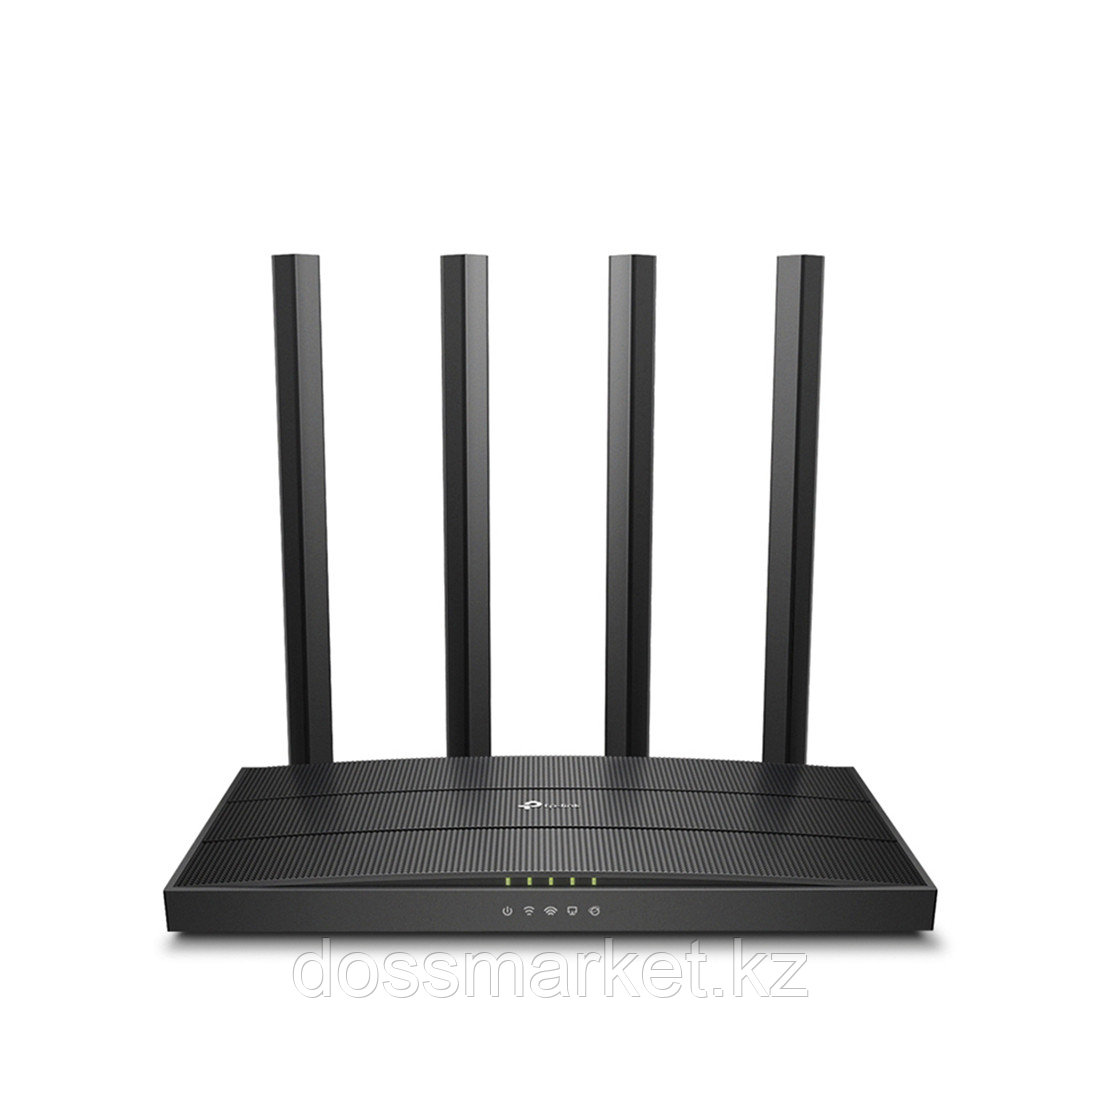 Маршрутизатор TP-Link Archer A6 - фото 1 - id-p106440614